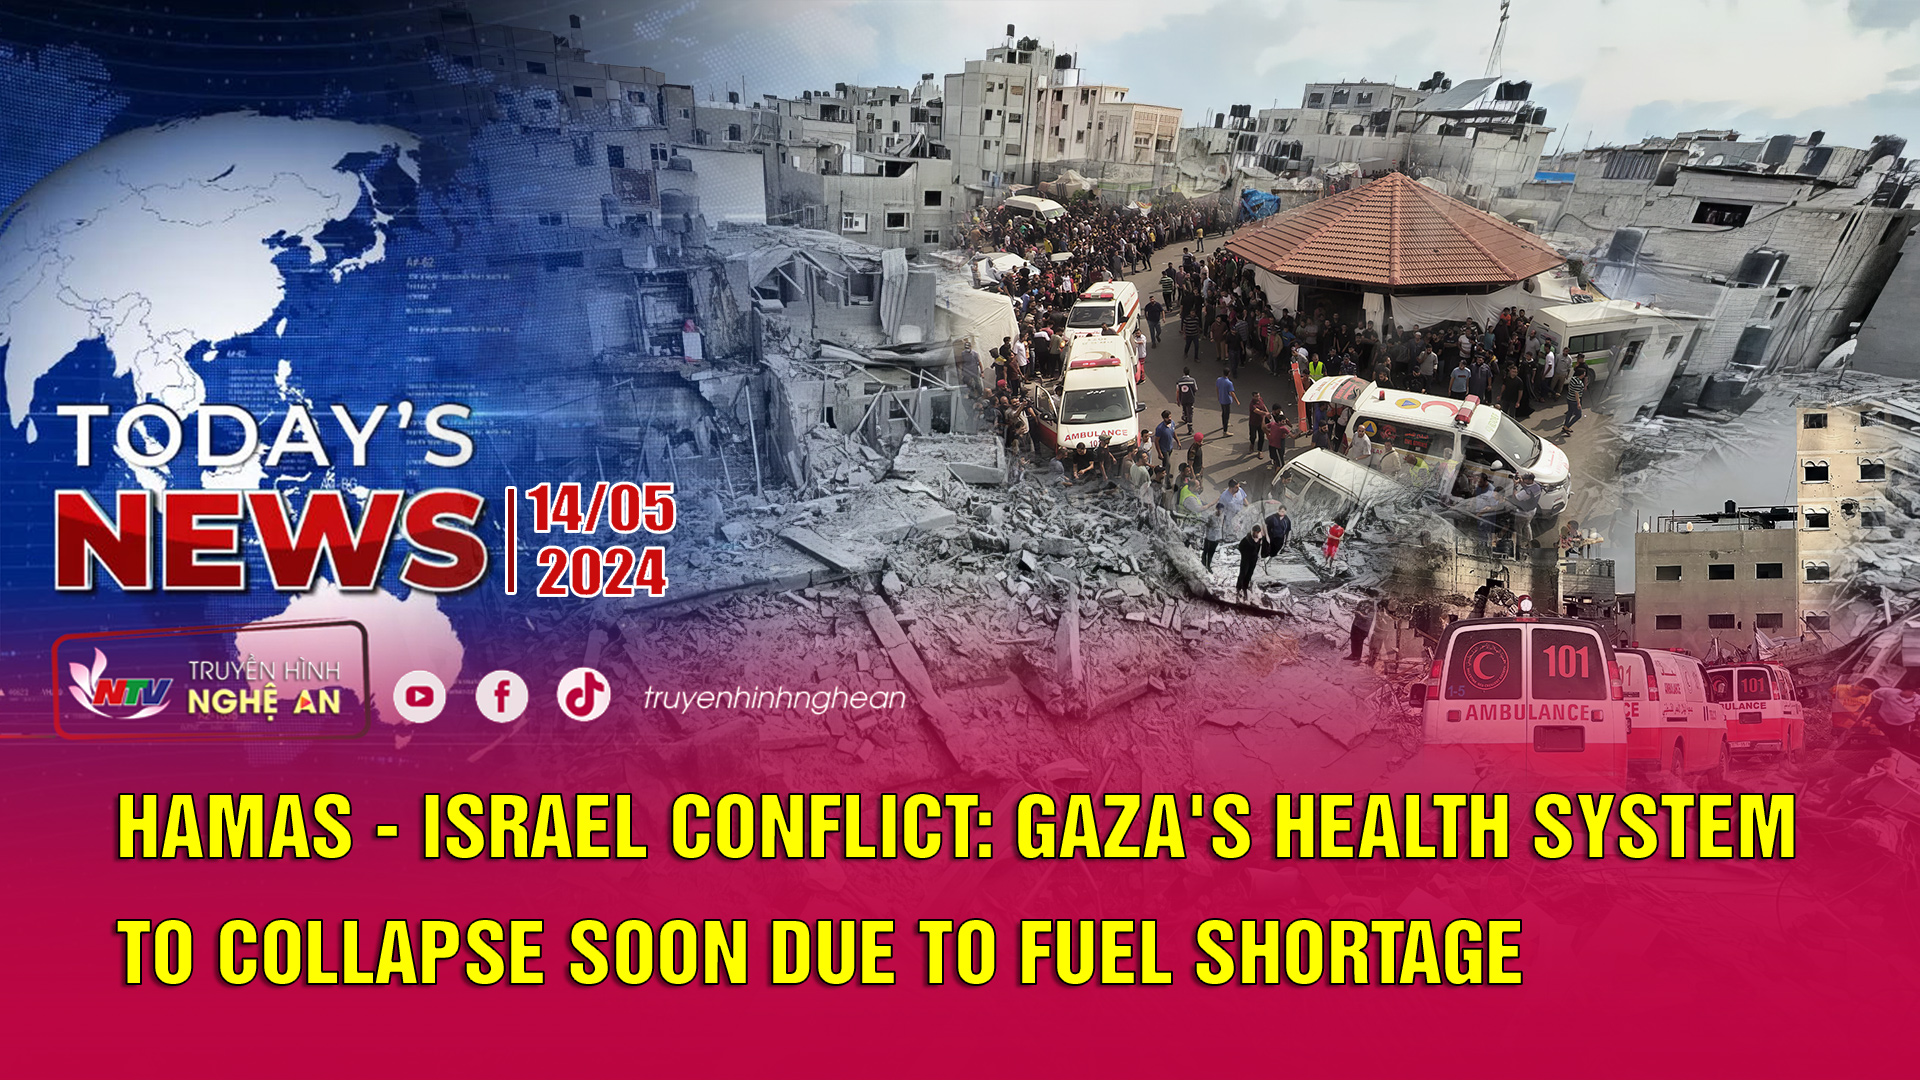 Today's News 14/5/2024: Gaza's health system to collapse soon due to fuel shortage